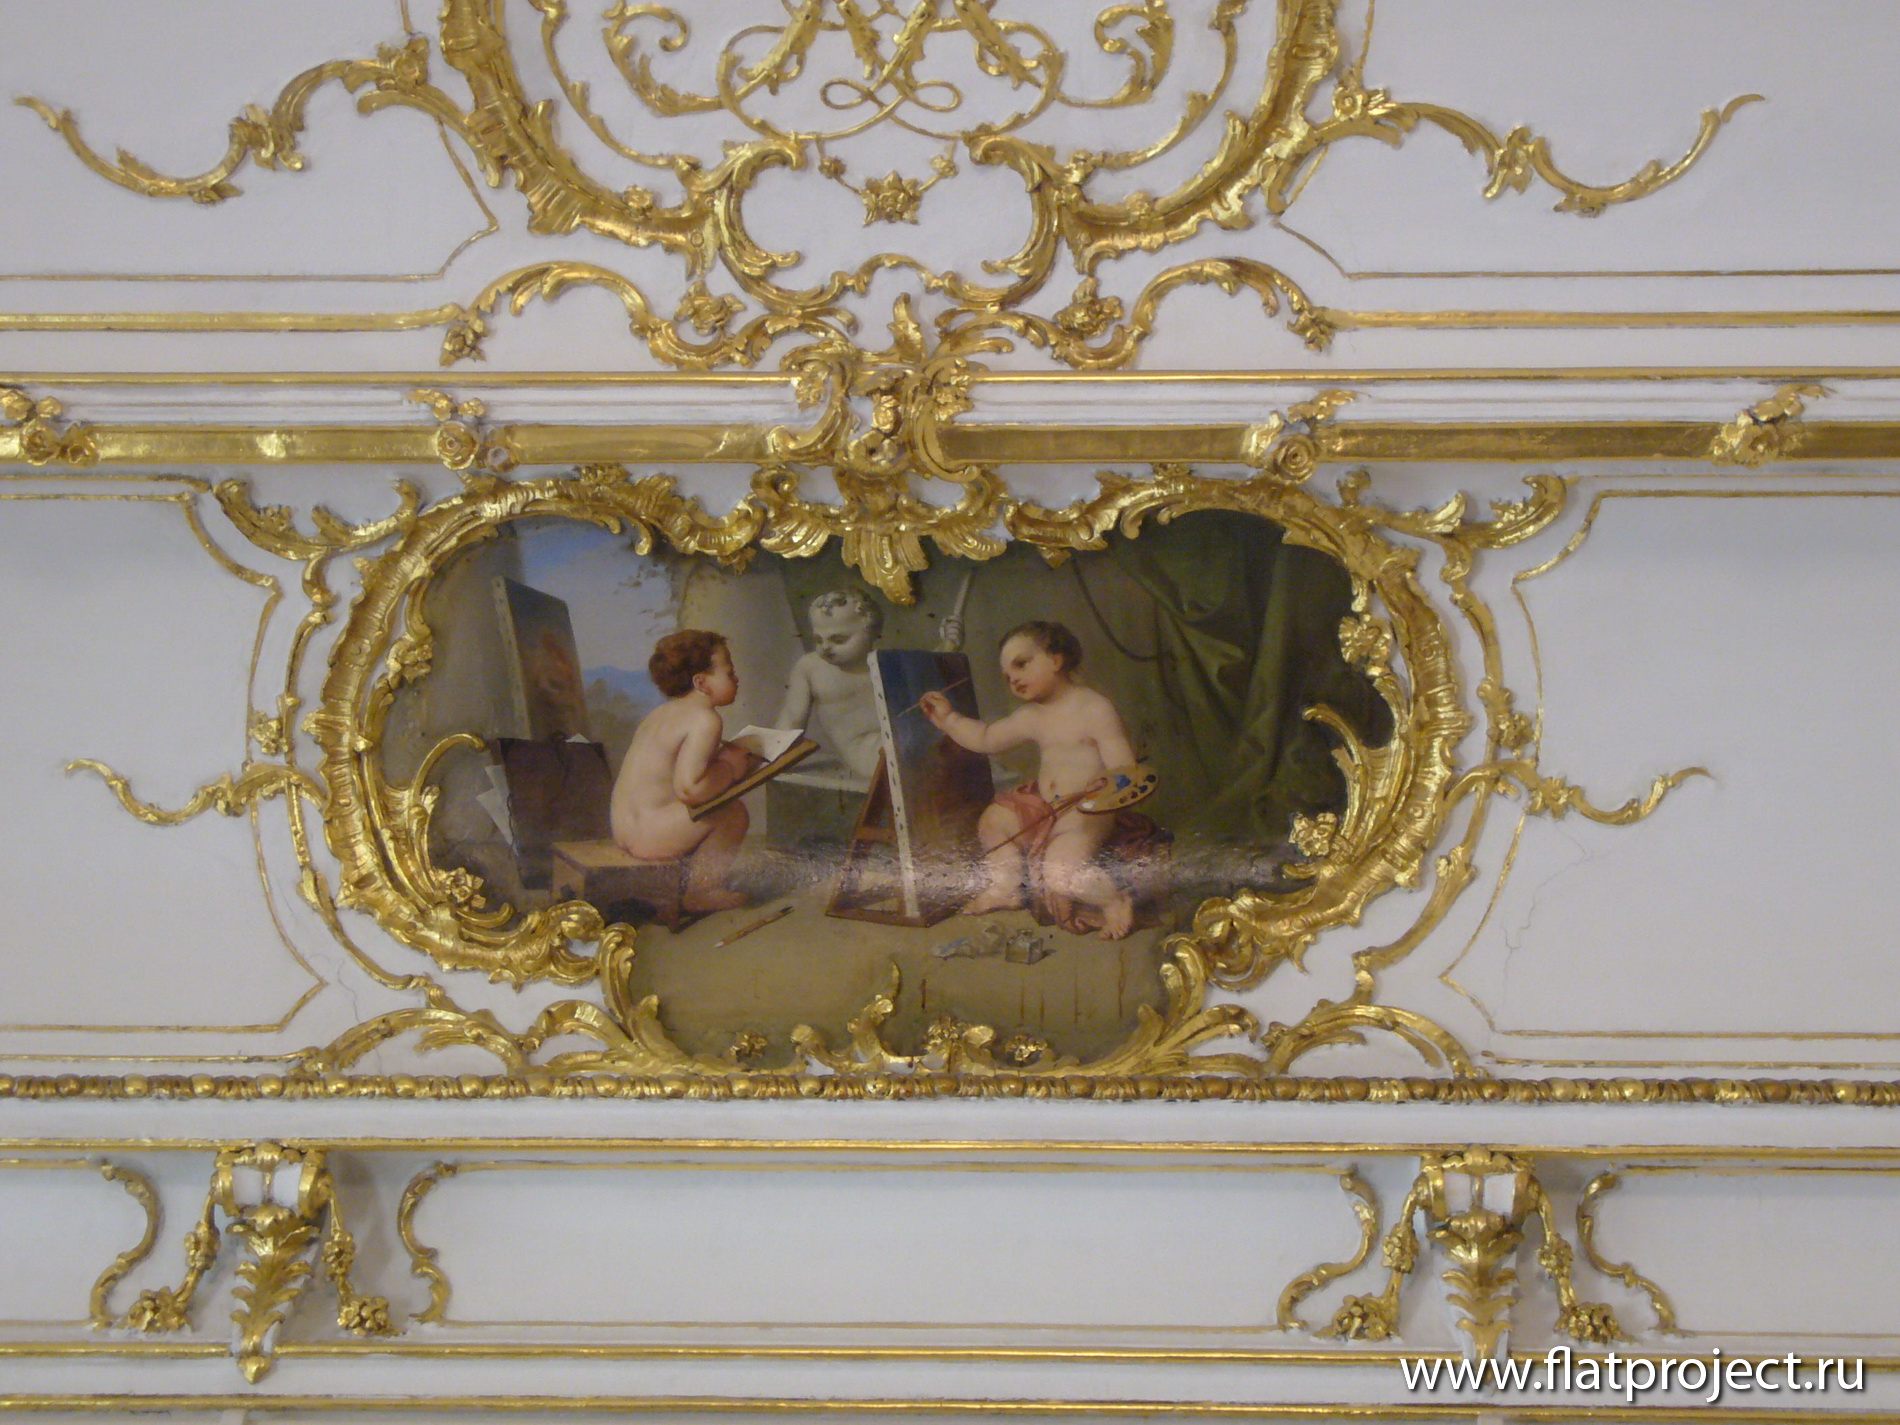 The State Russian museum interiors – photo 39